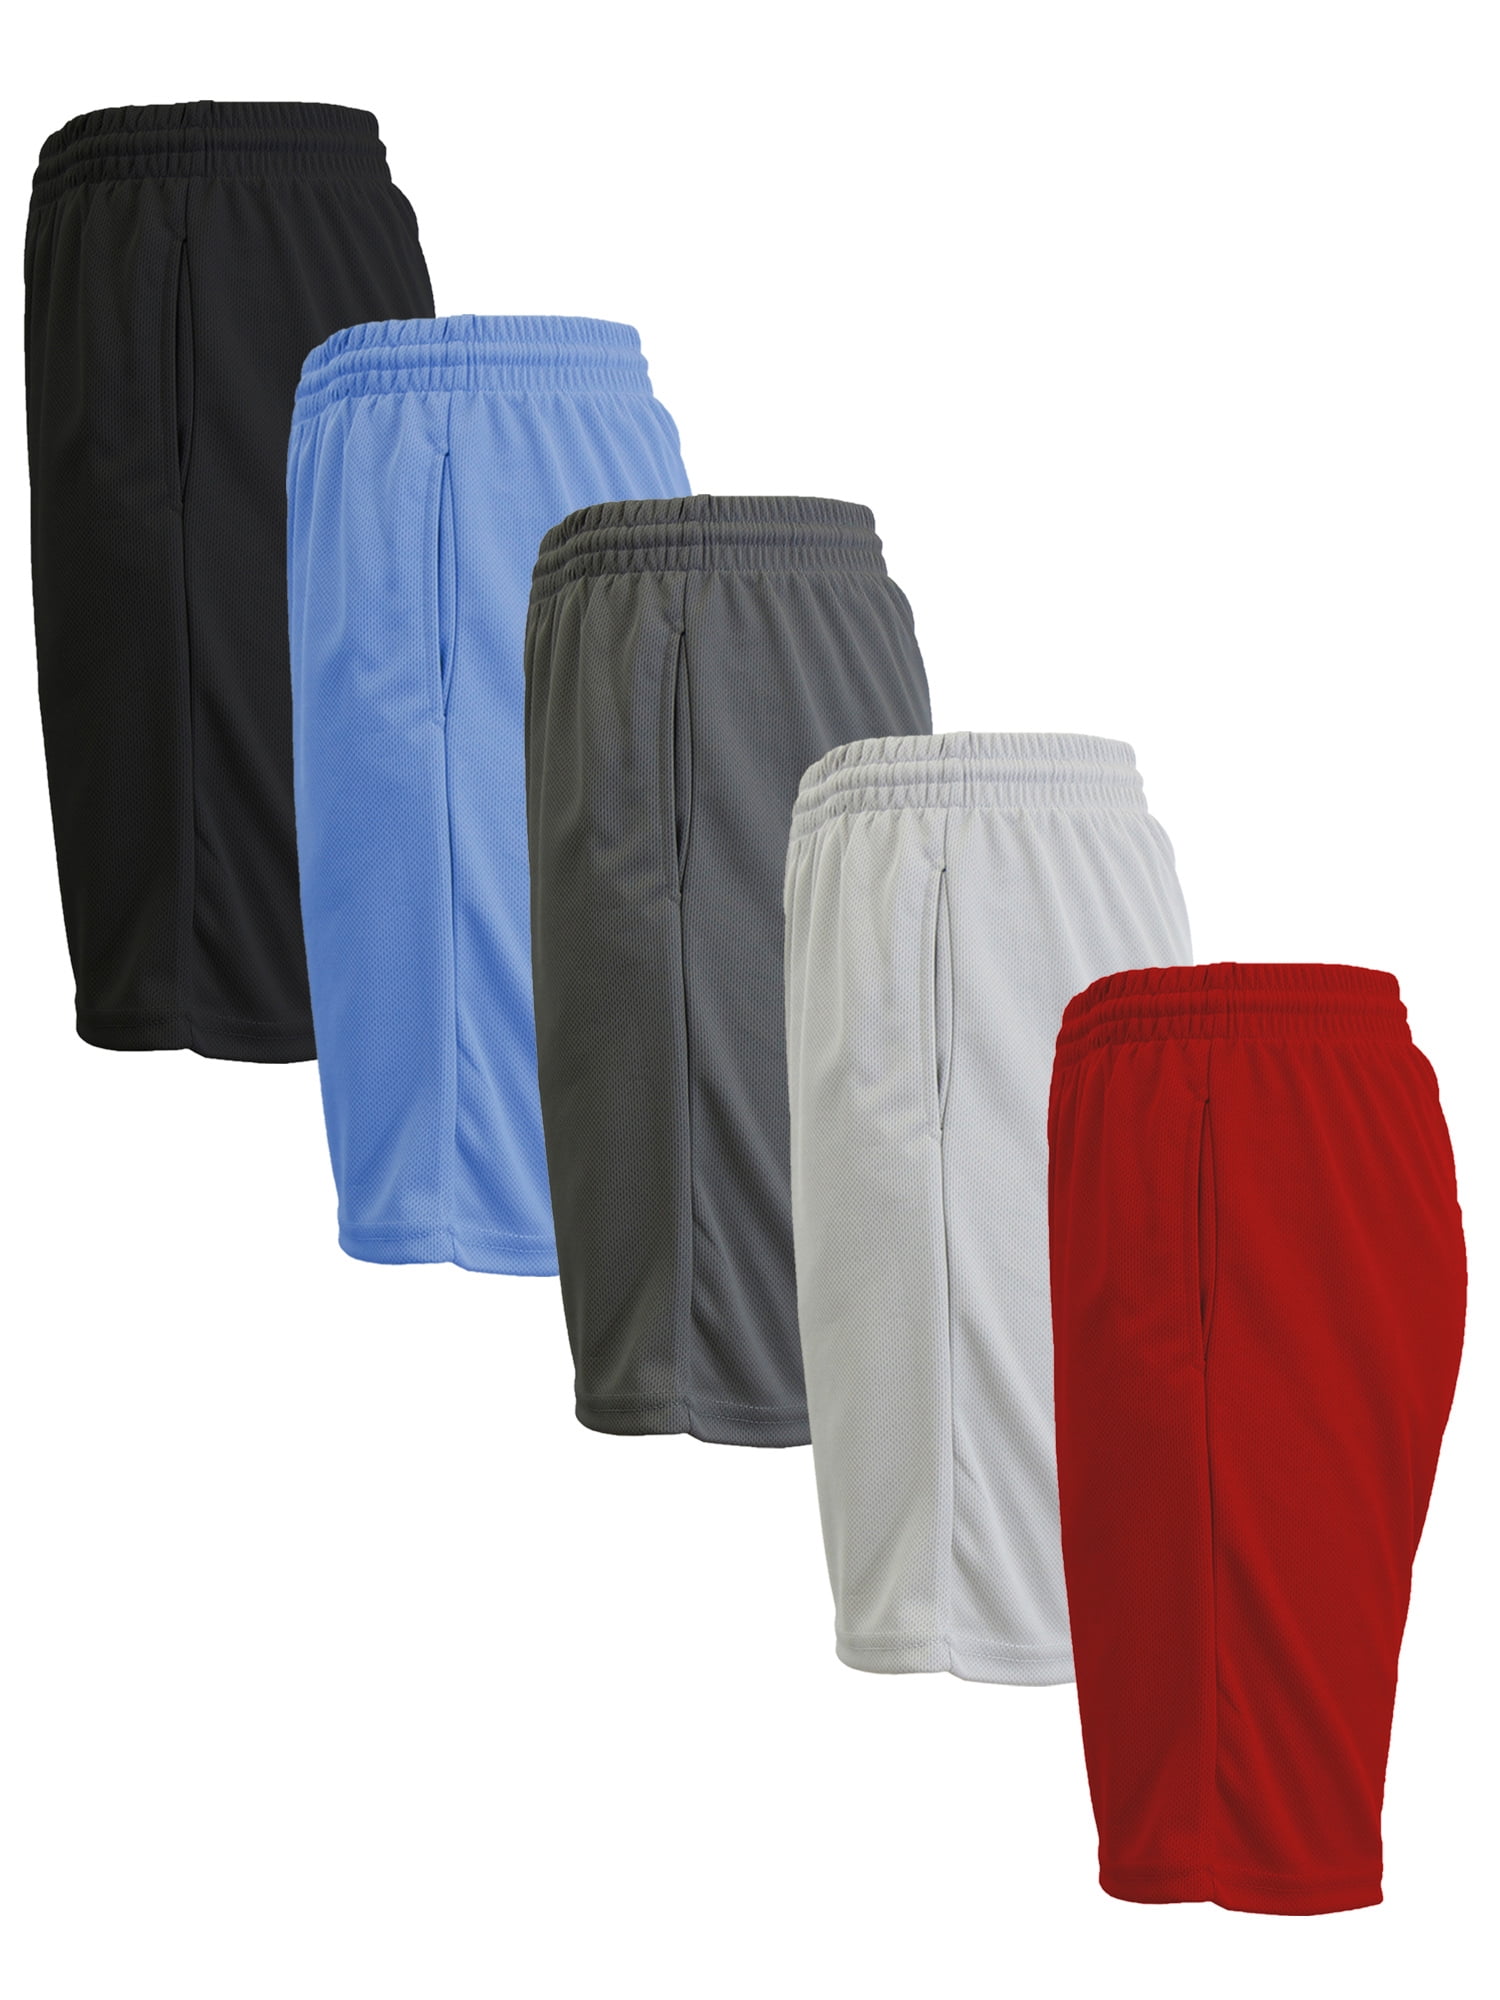 Wick Dry Shorts